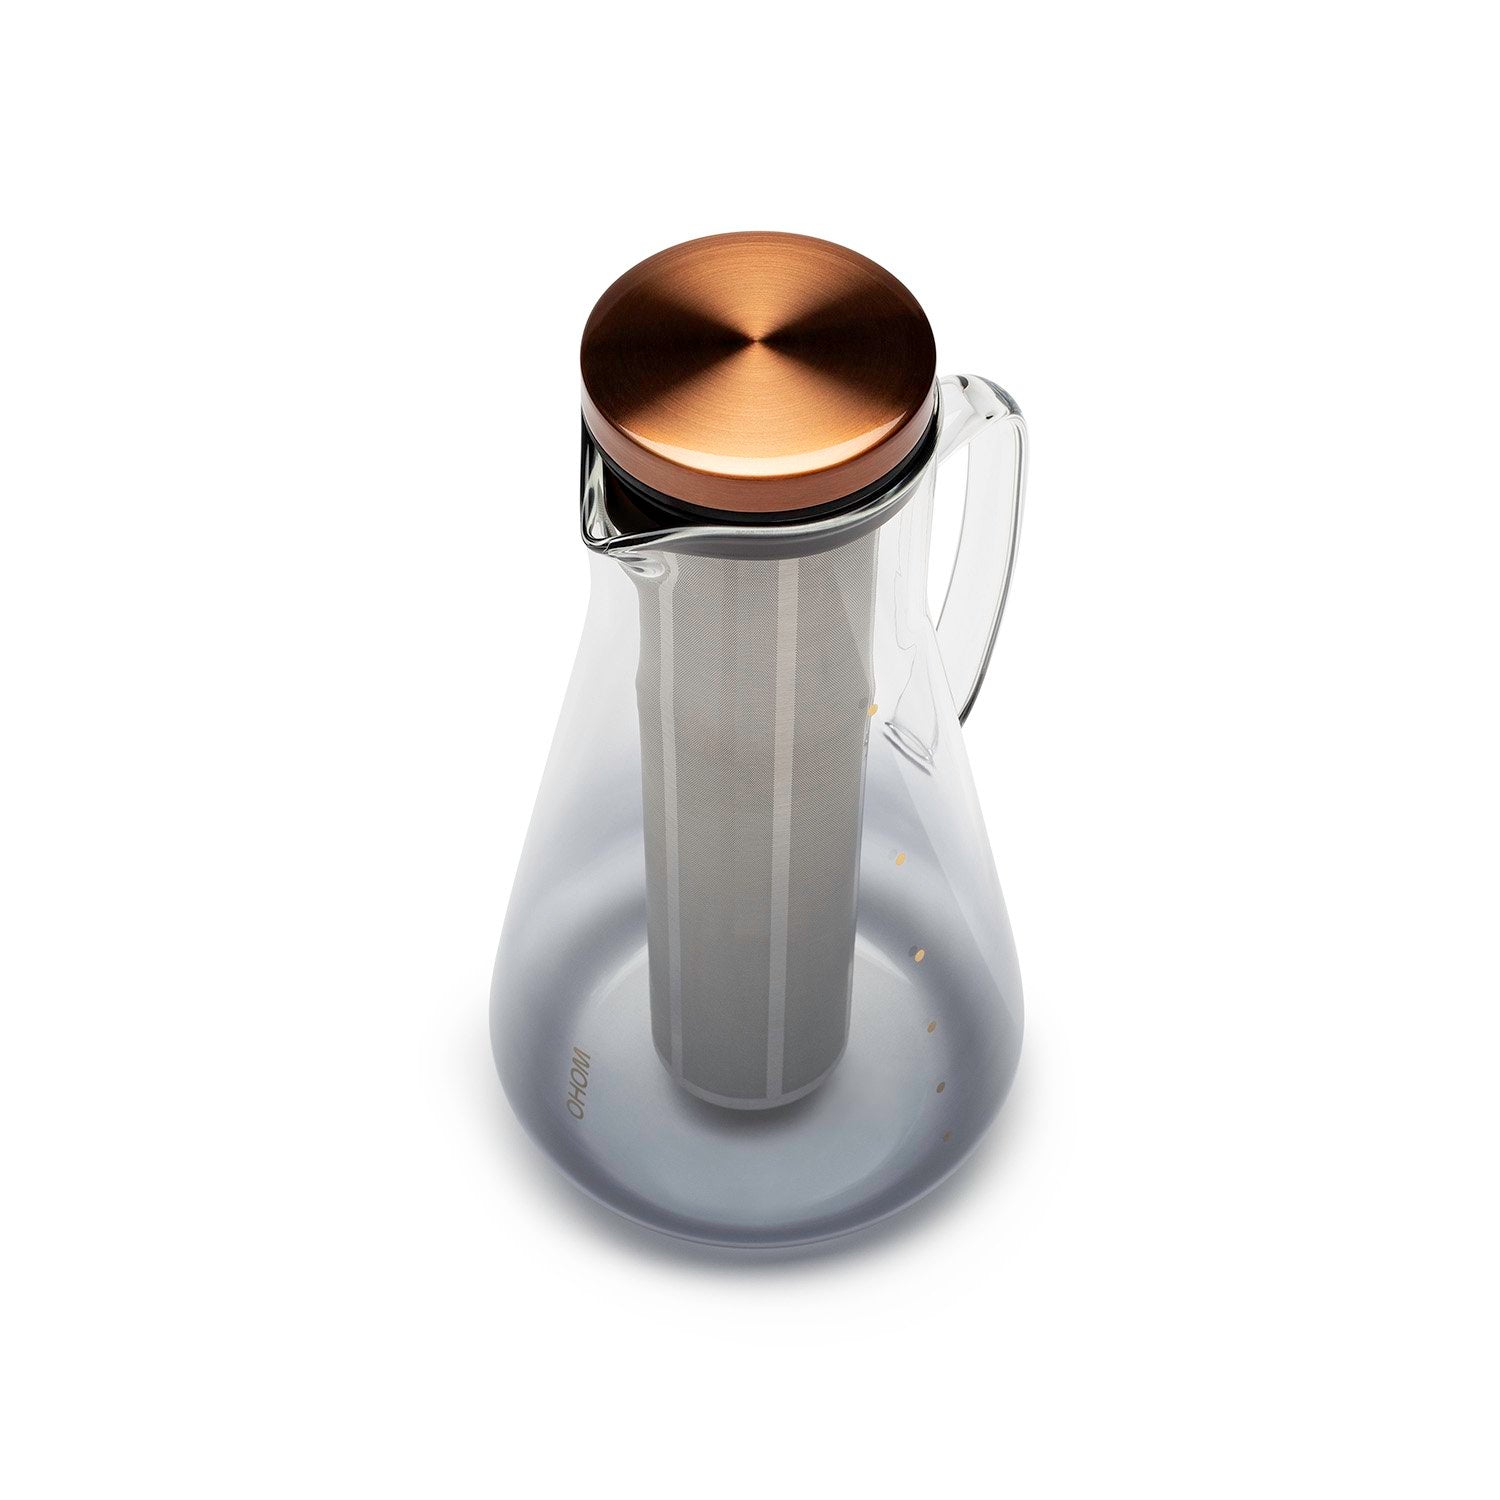 Top view of pitcher with infuser